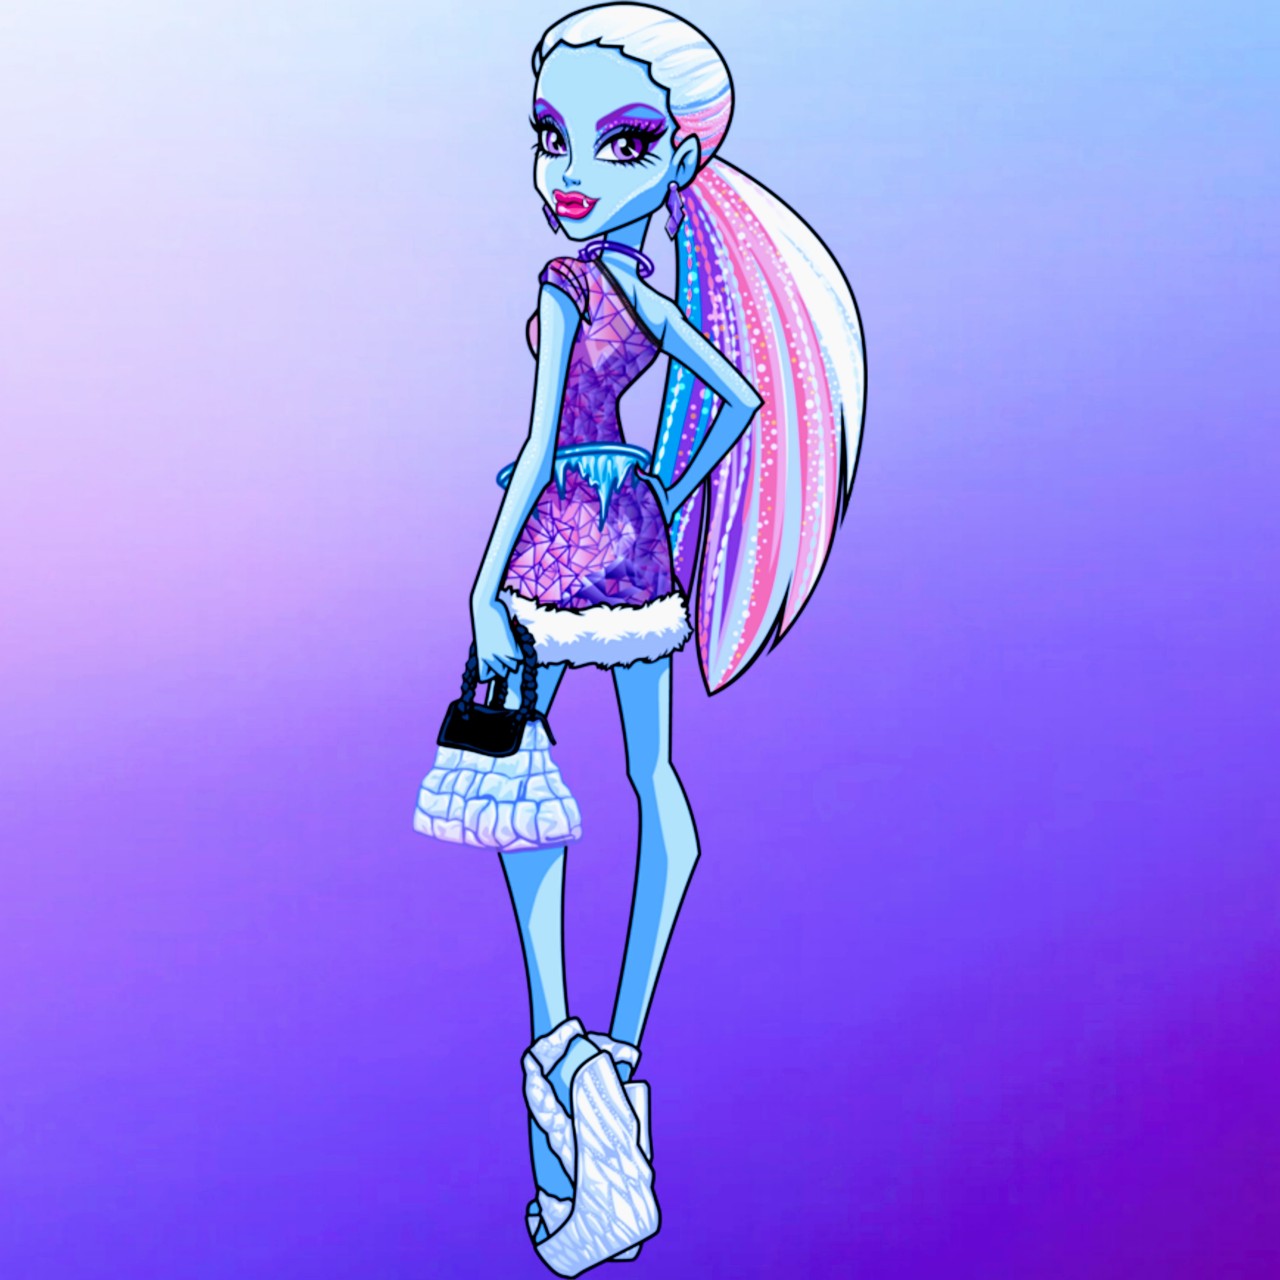 Monster High IconsLike and/or reblog if you save/use #monster high #scaris: city of frights #abbey bominable#ghoulia yelps#sparkly#glitter#icons#square icons #icons by me